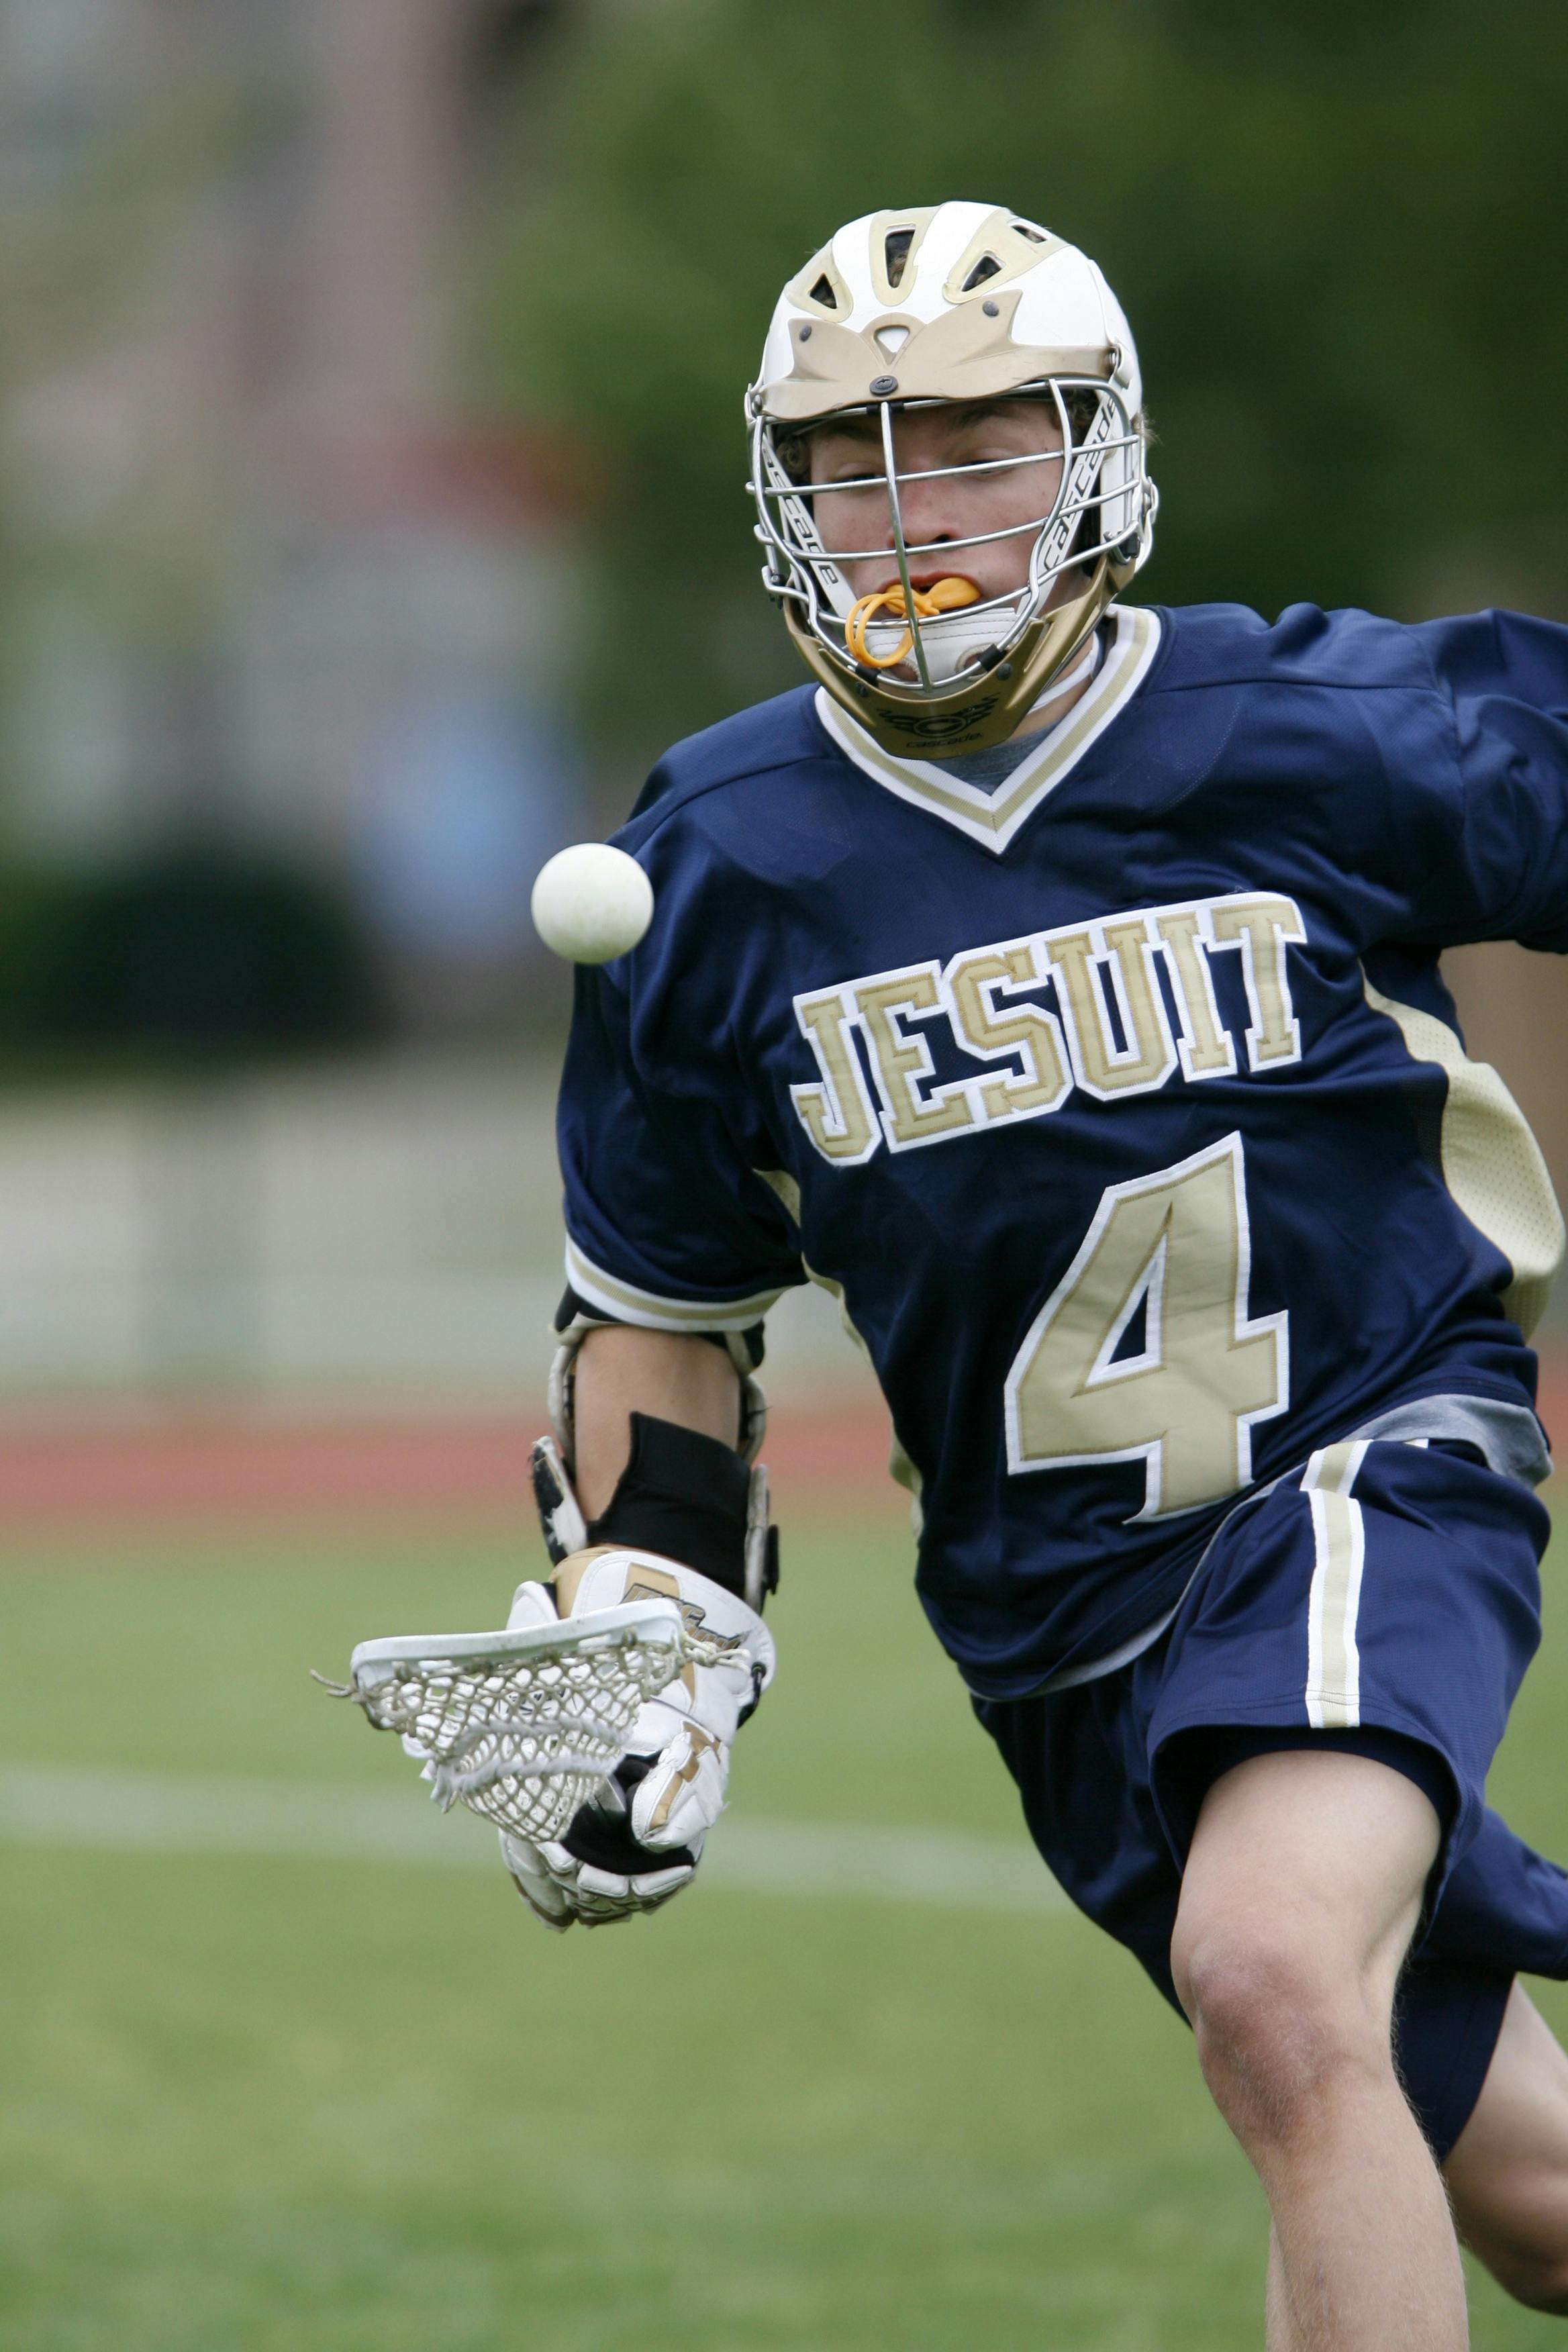 Man Holding Lacrosse Stick Running On Field During Daytime Free Images, Photos, Reviews